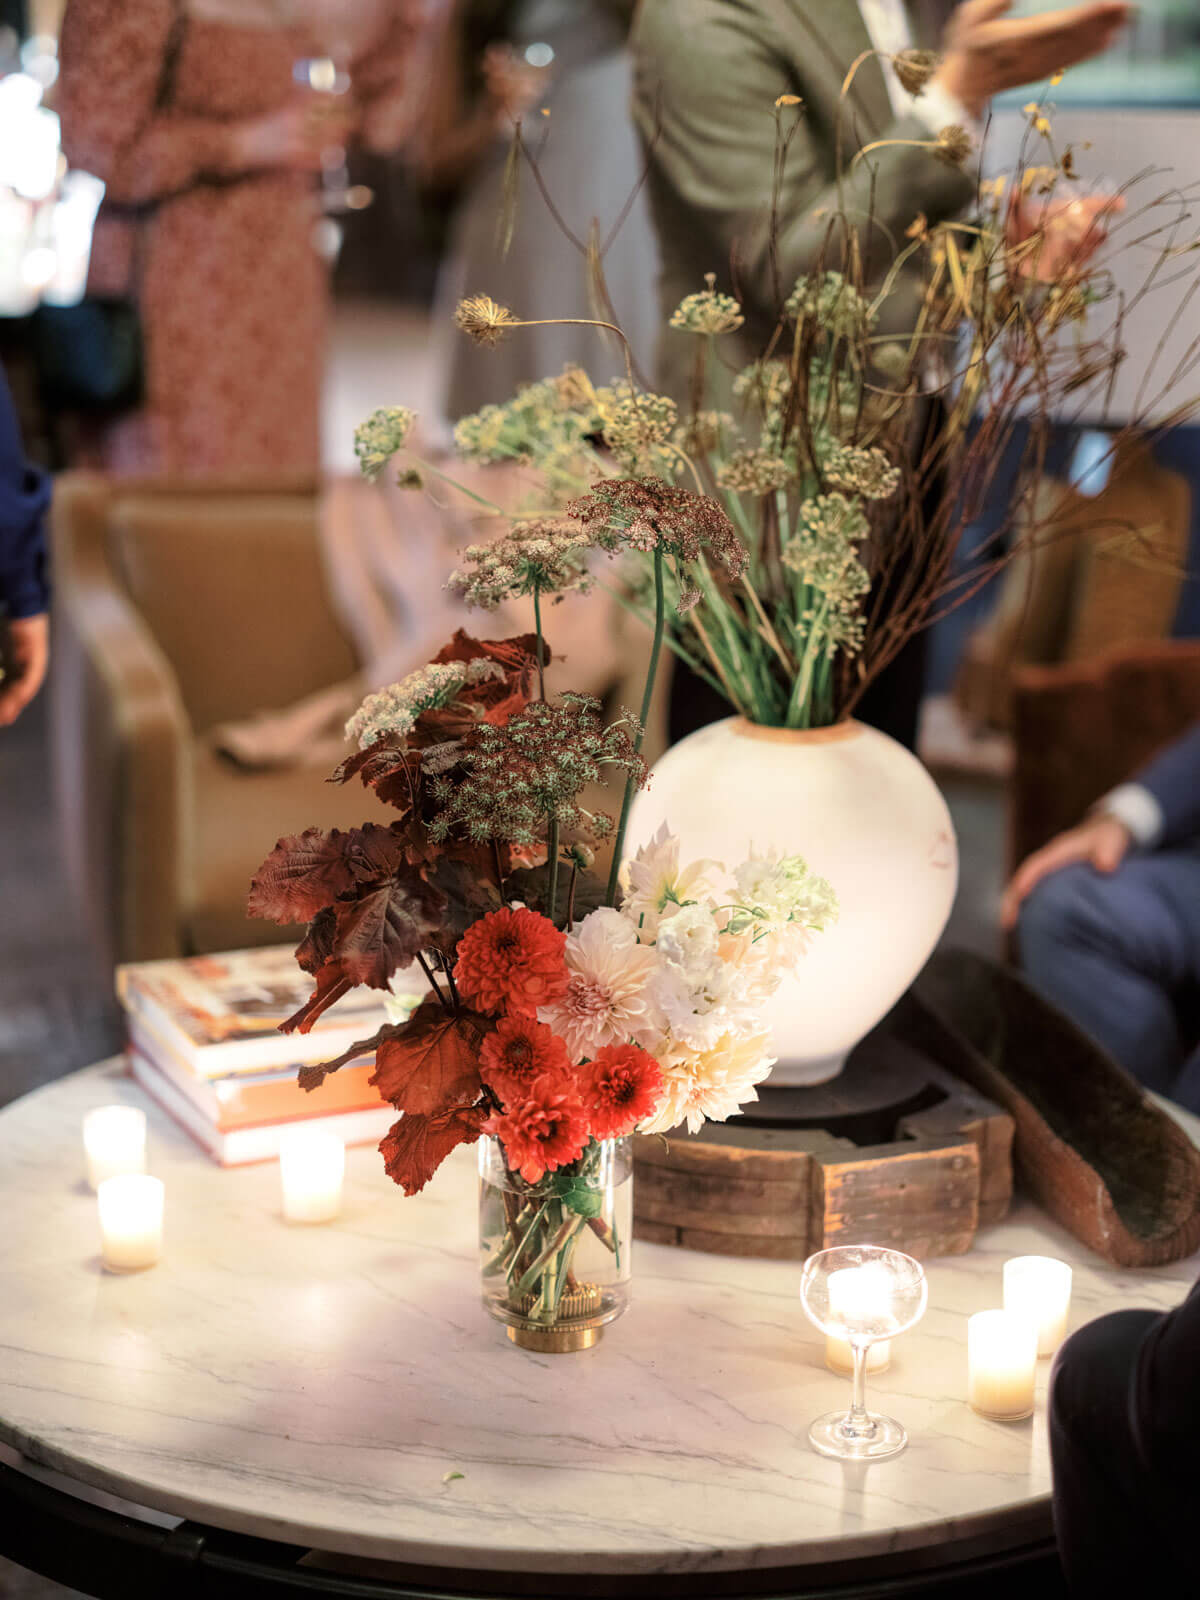 Beautiful mix of flowers and dried leaves. 2022 wedding trends image by Jenny Fu Studio